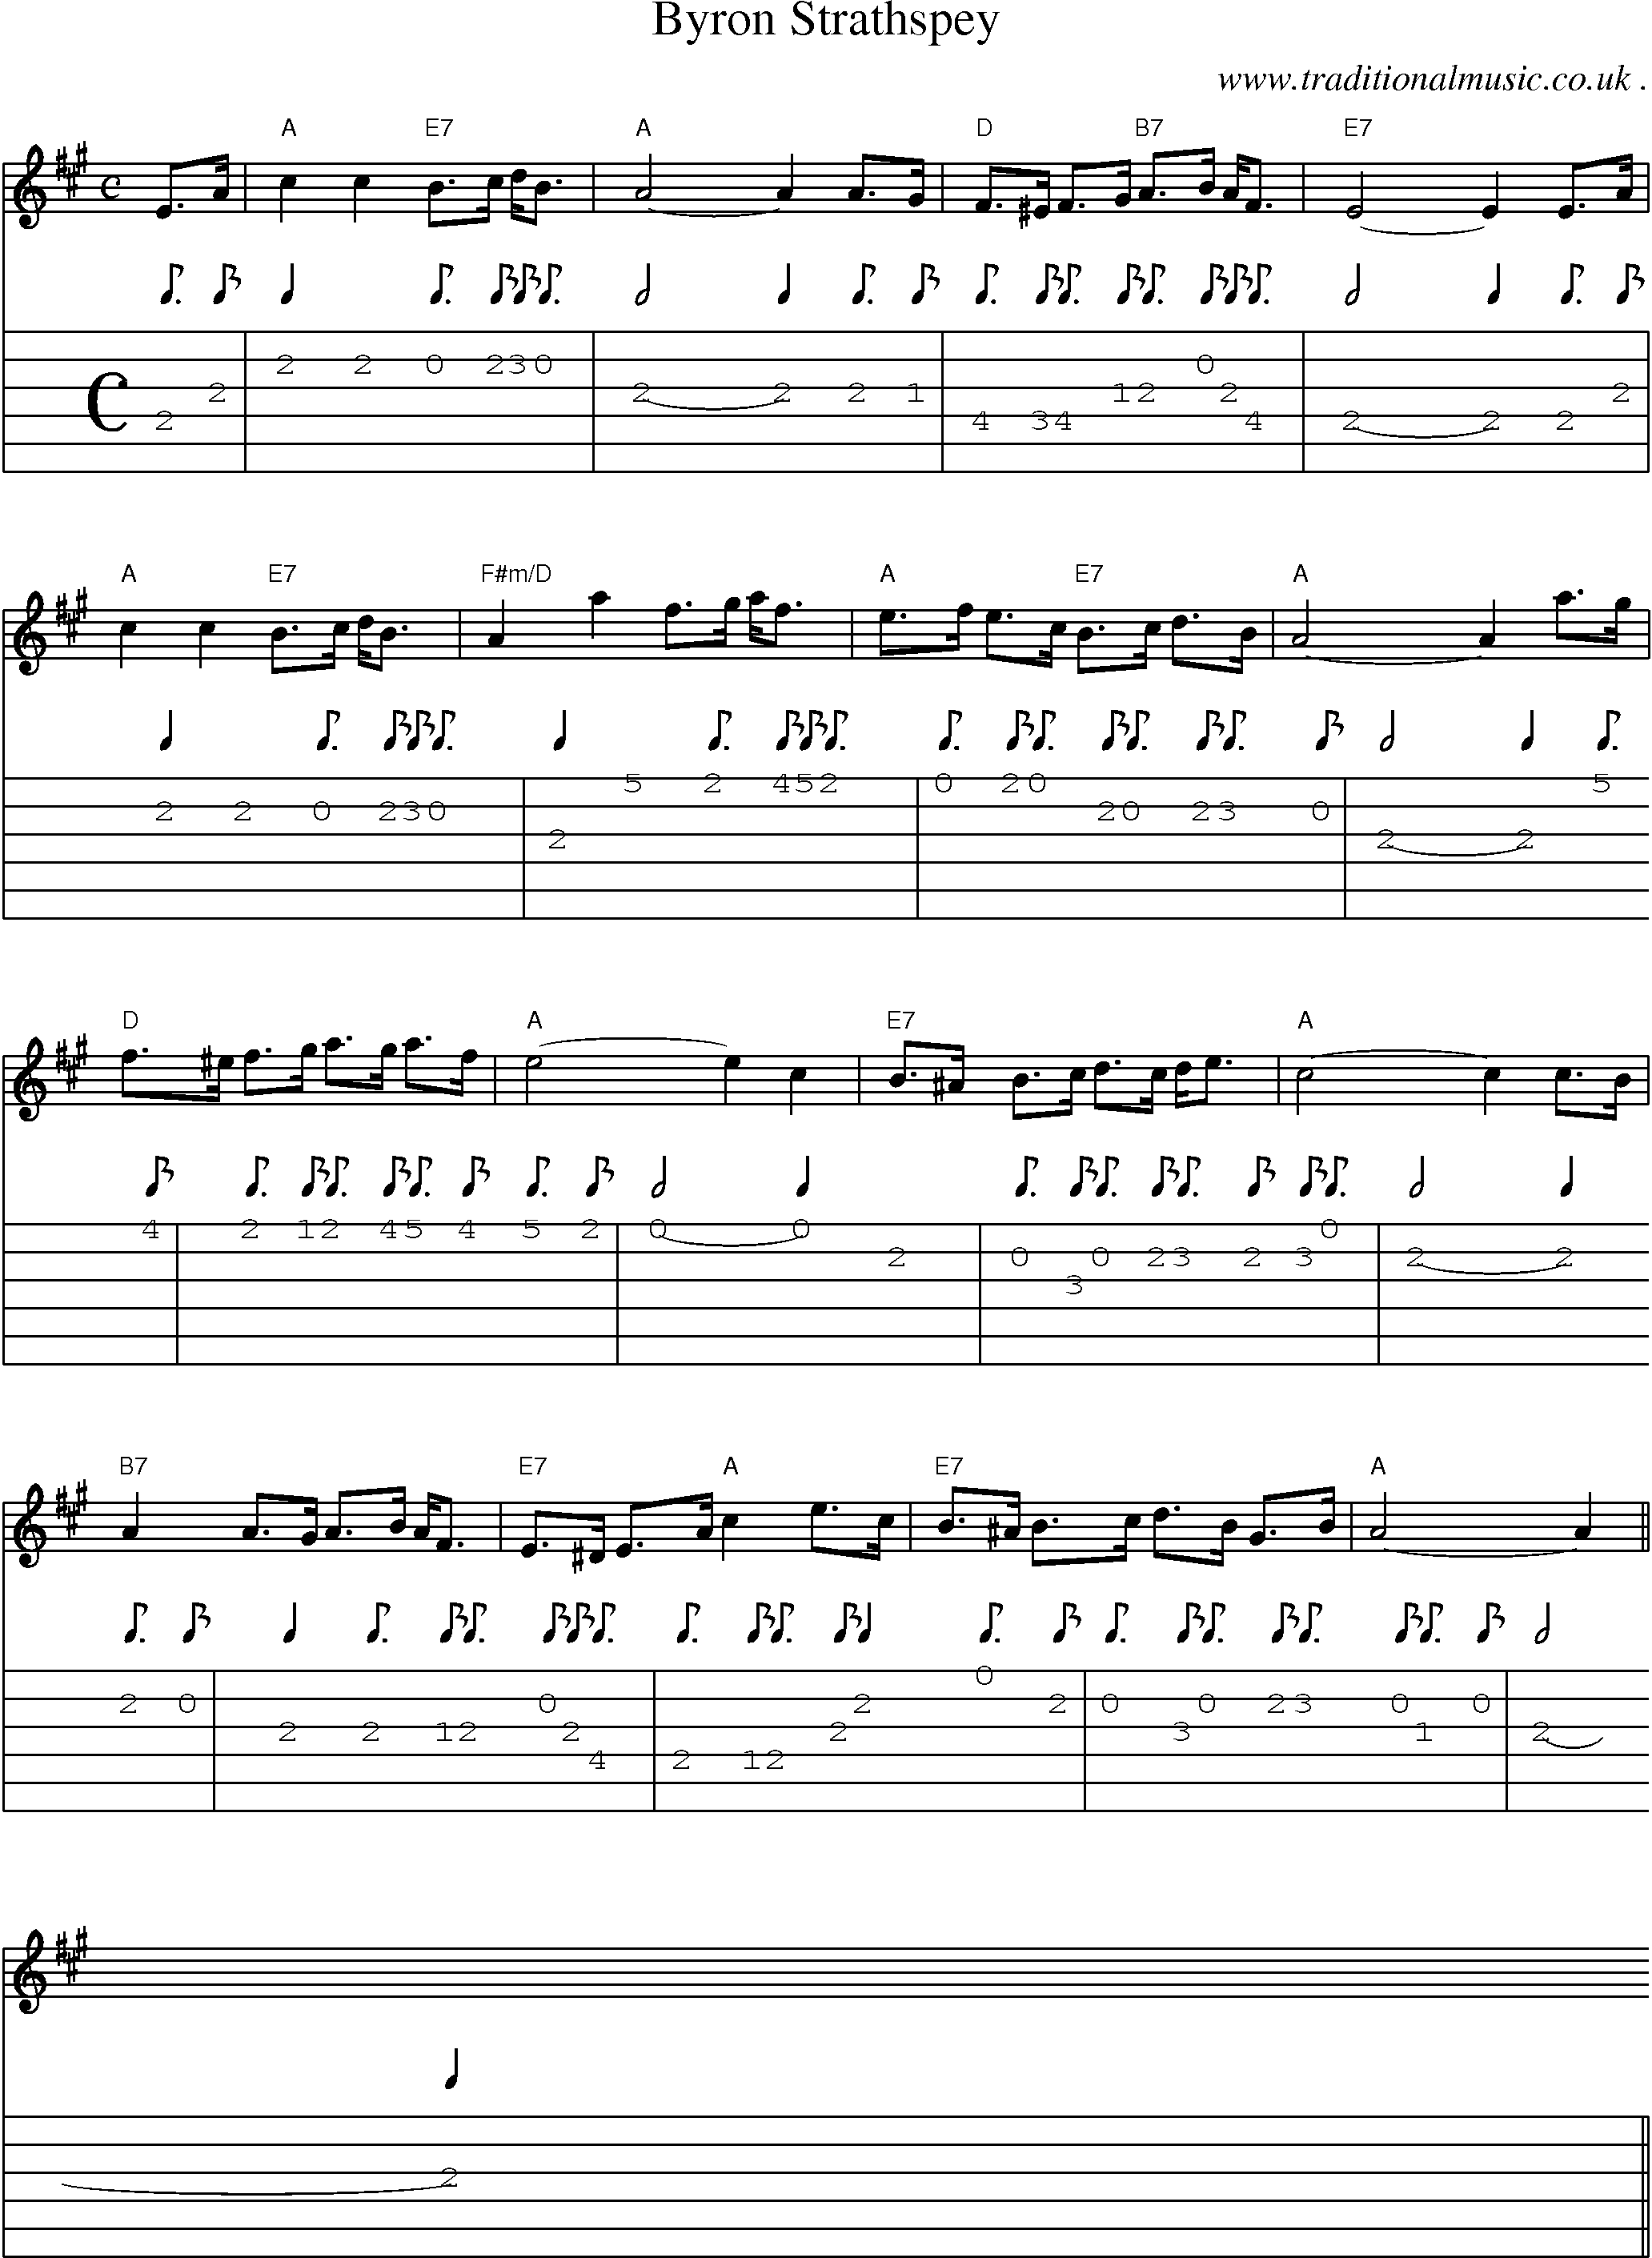 Sheet-music  score, Chords and Guitar Tabs for Byron Strathspey